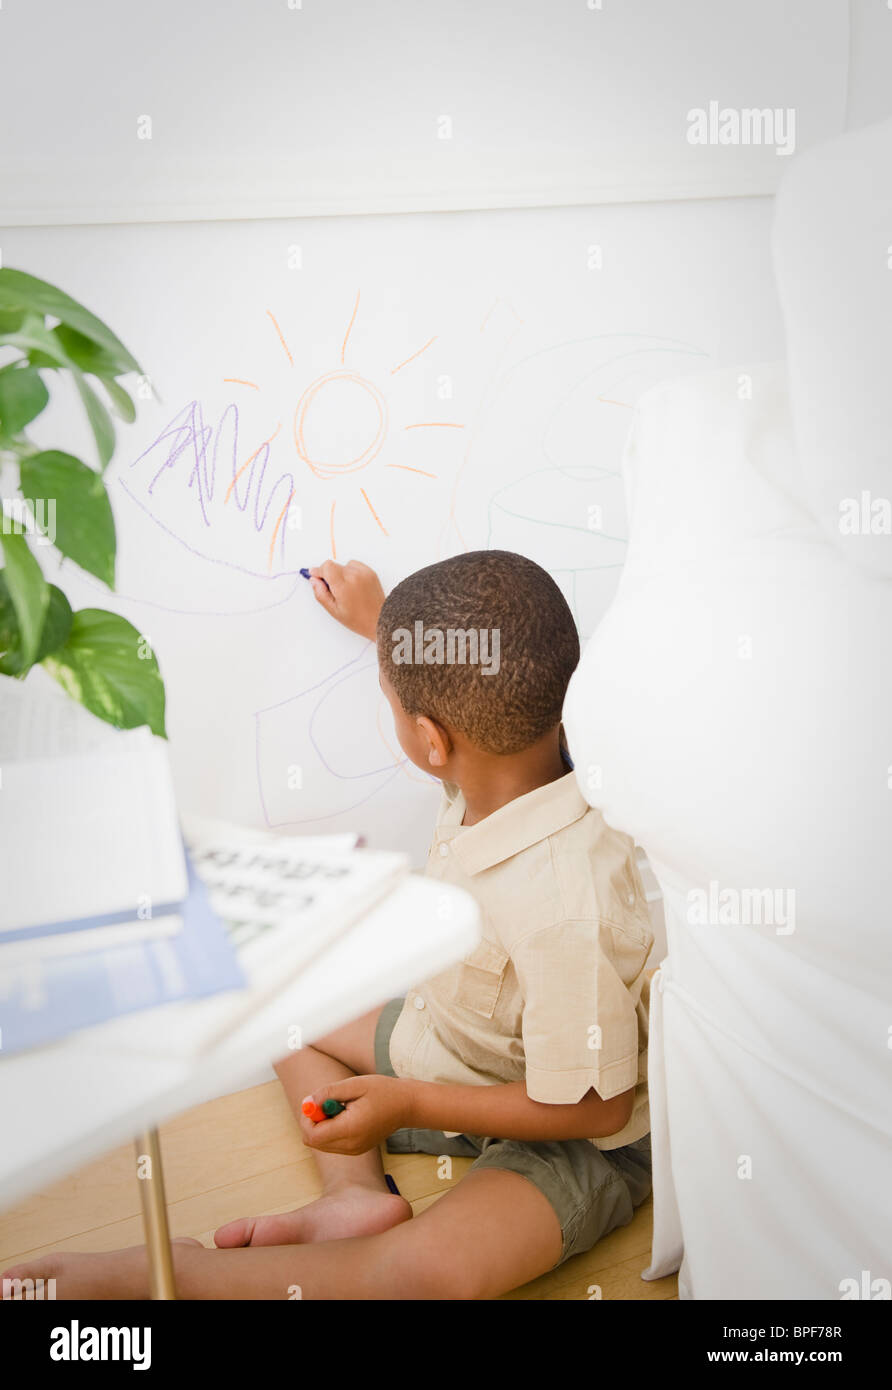 African American boy drawing on wall with crayon Stock Photo